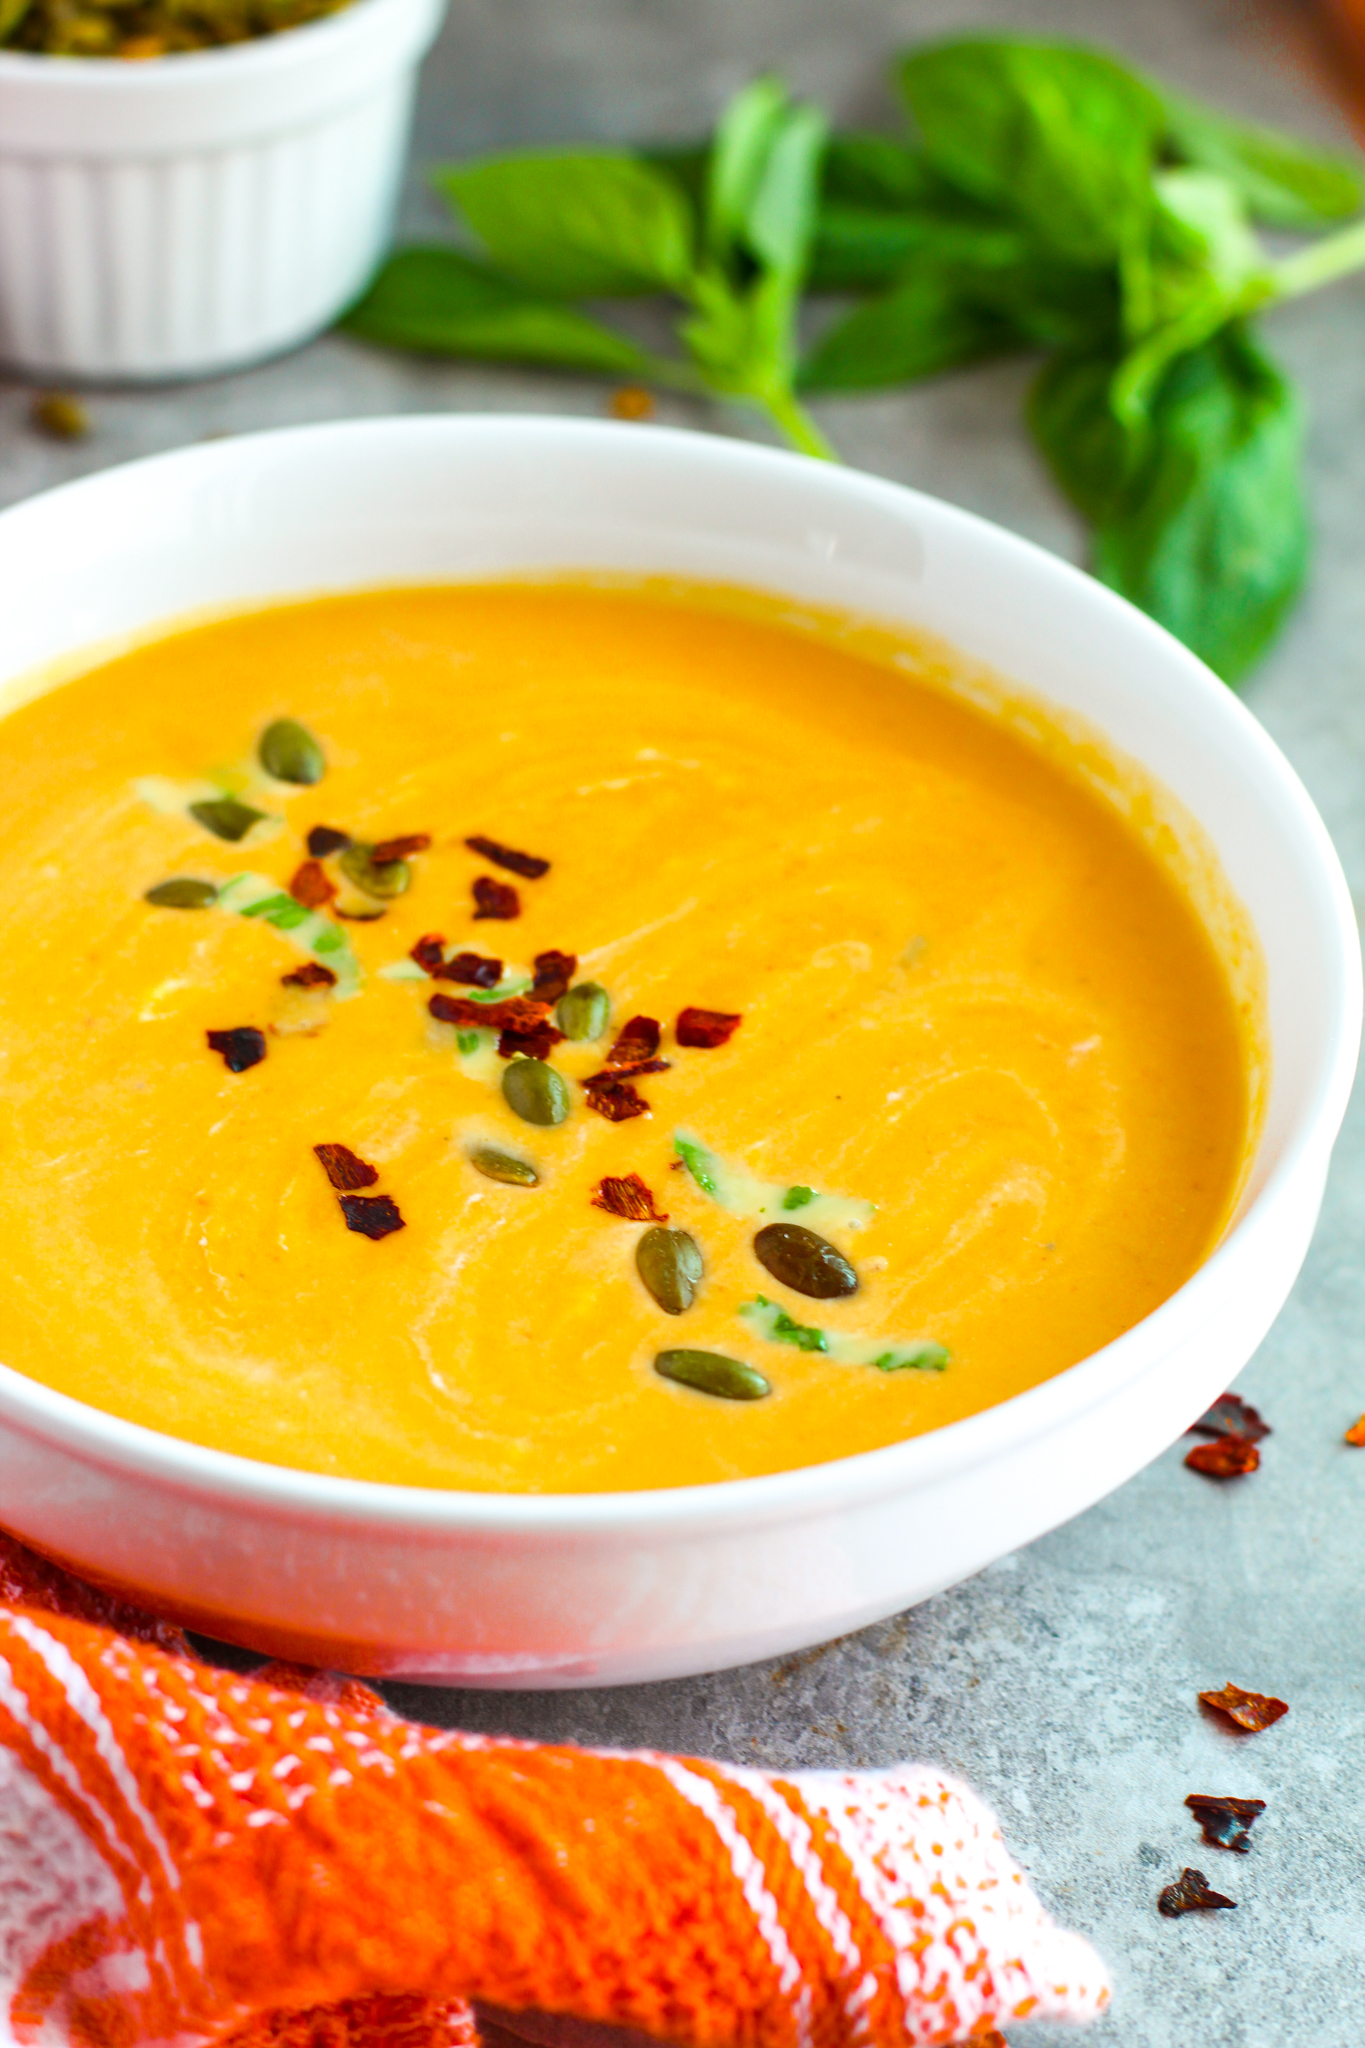 A photo of pumpkin soup garnished with pepitas and chili flakes